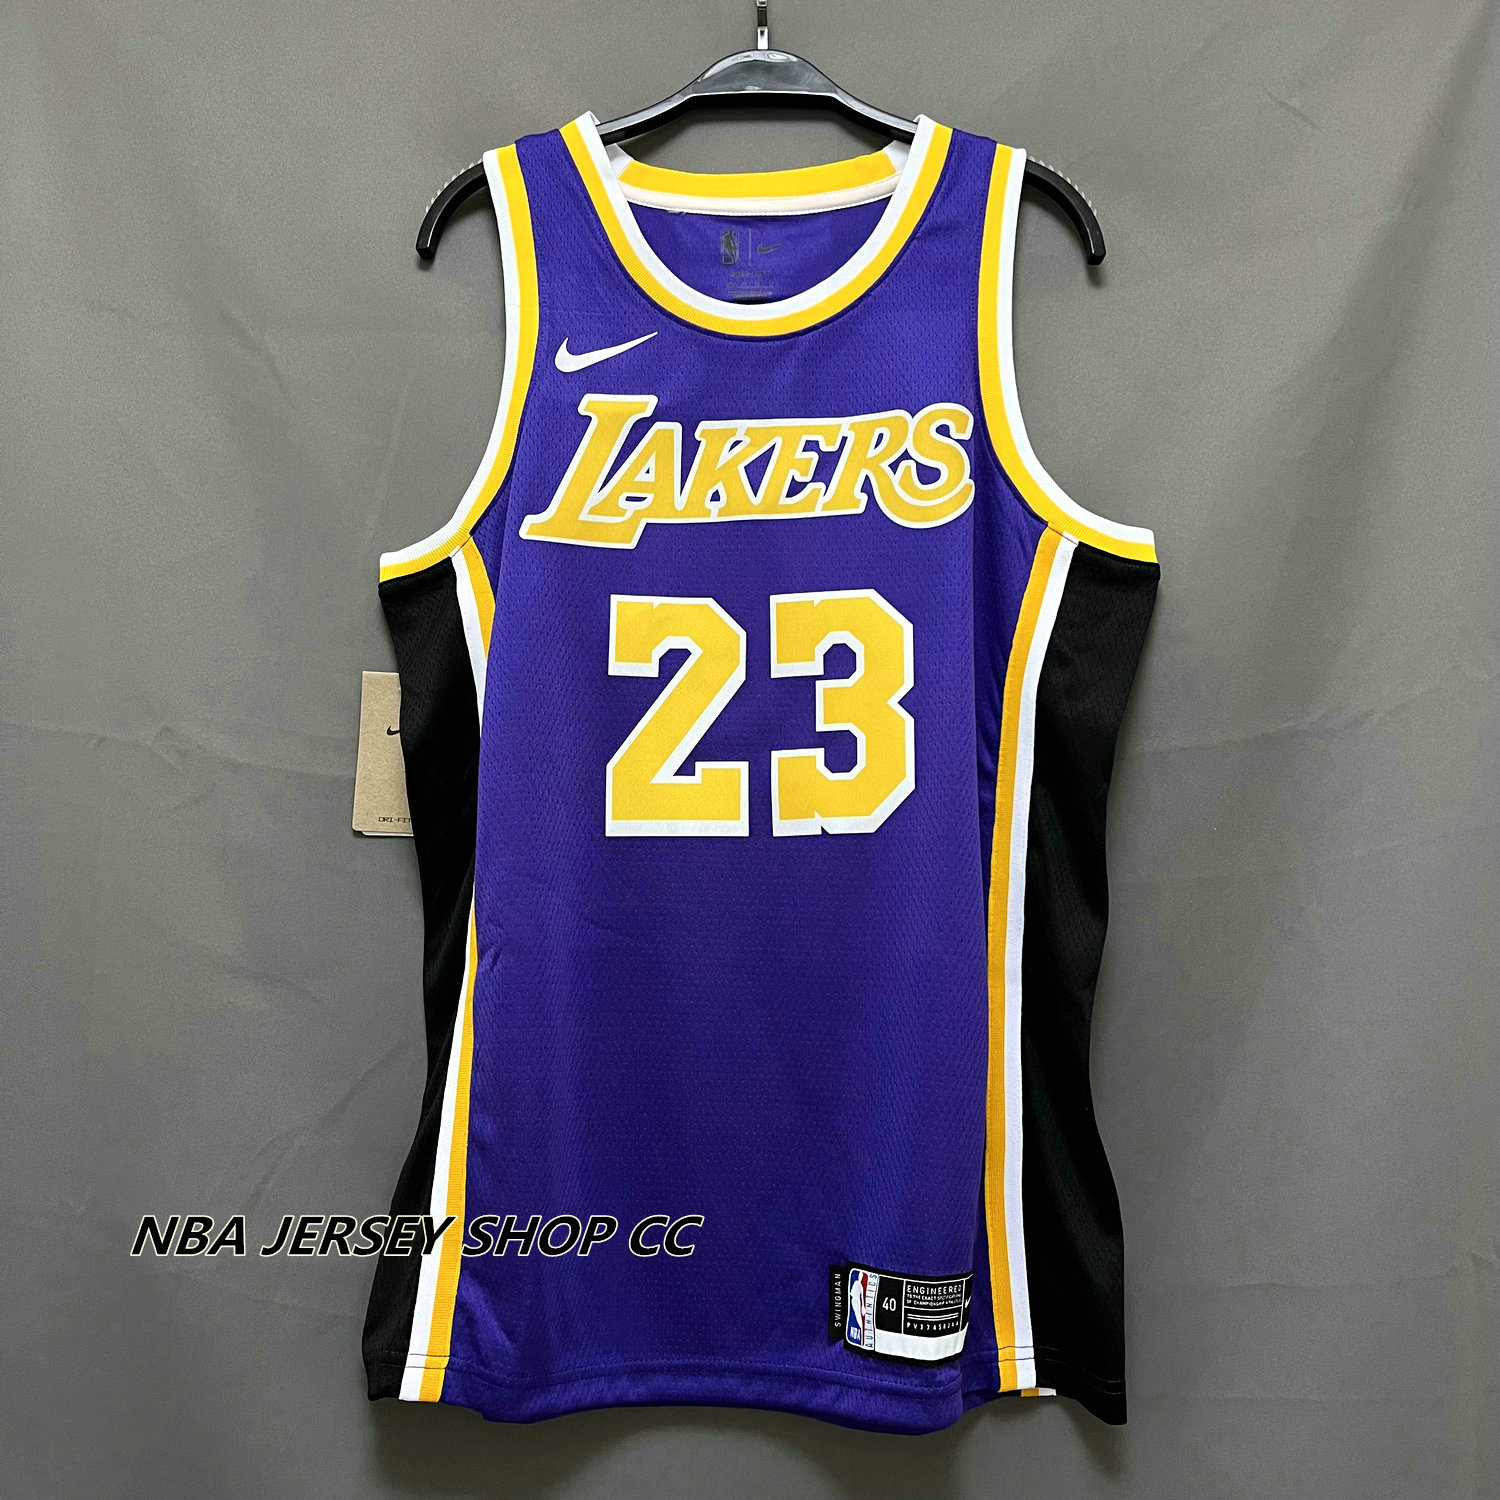 Nike+Lebron+James+23+Lakers+Cw3669+734+Authentic+NBA+Swingman+Jersey+44+M  for sale online